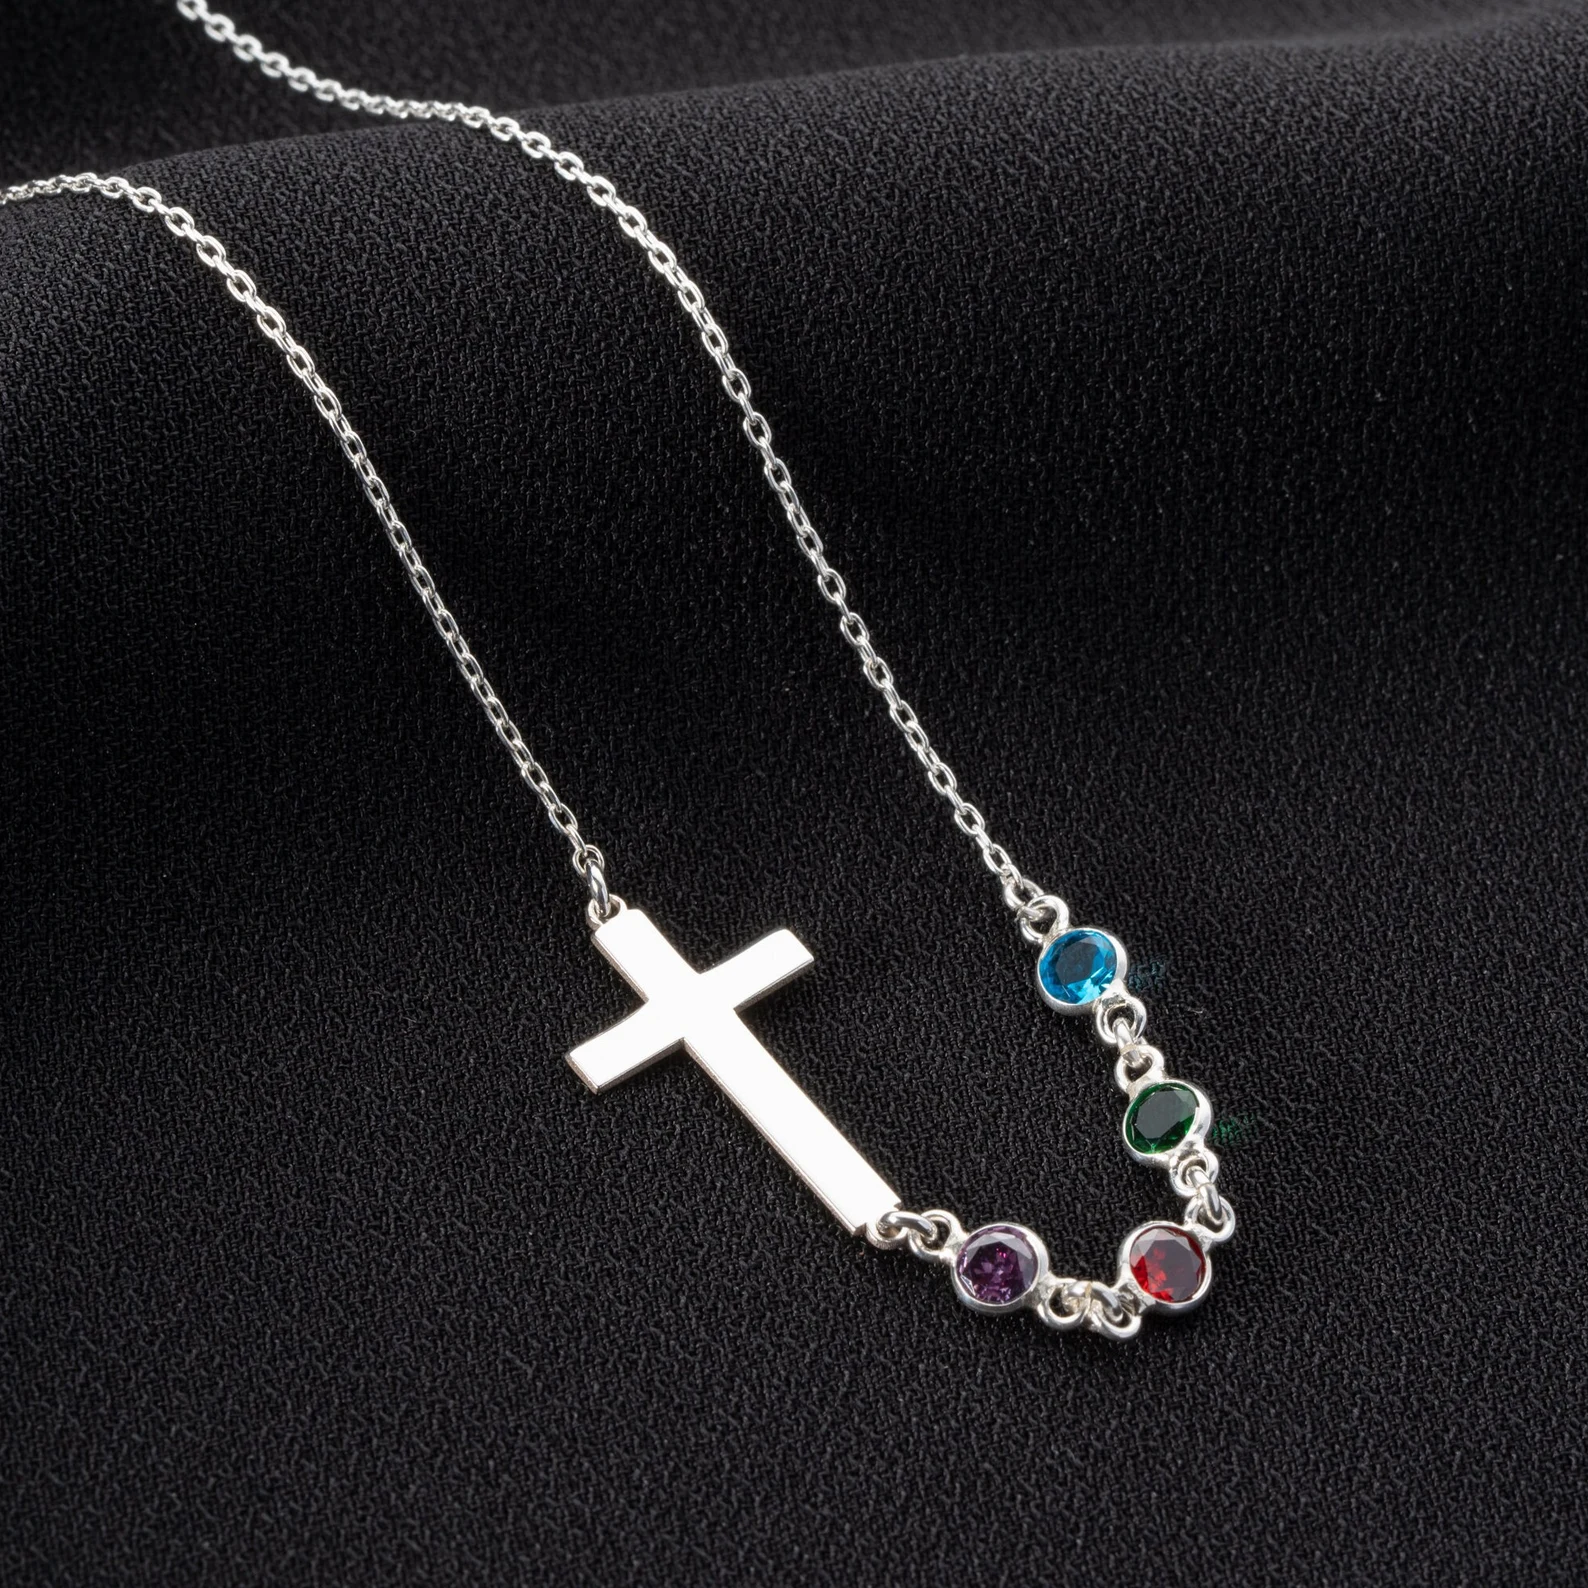 Personalized Birthstone Silver Cross Necklace, Cross Family Birthstone Necklace